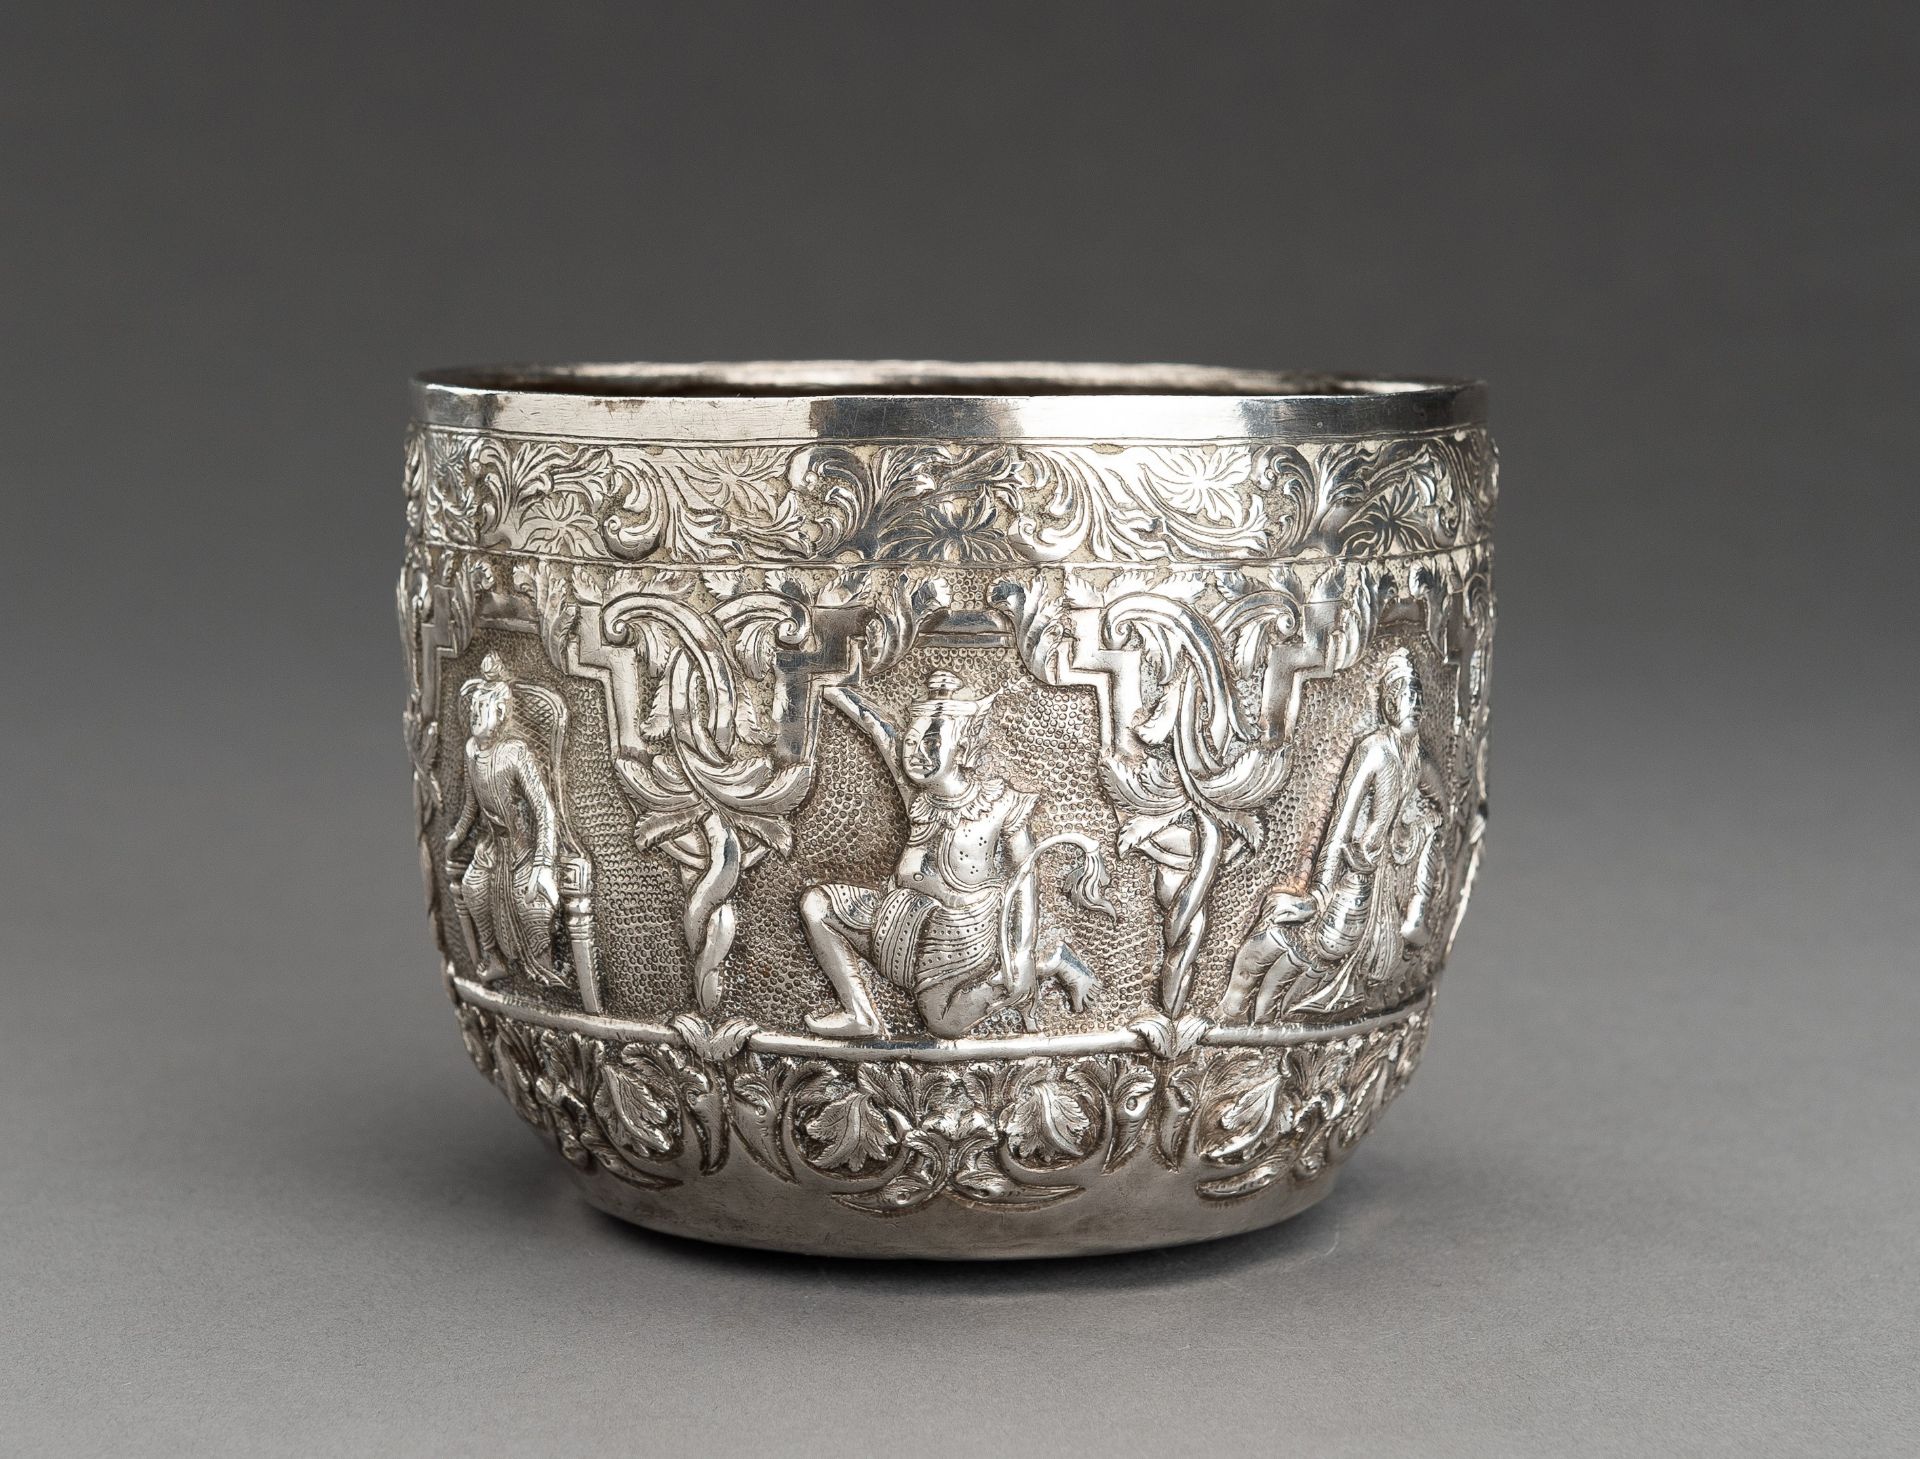 AN EMBOSSED SILVER BOWL WITH FIGURAL RELIEF